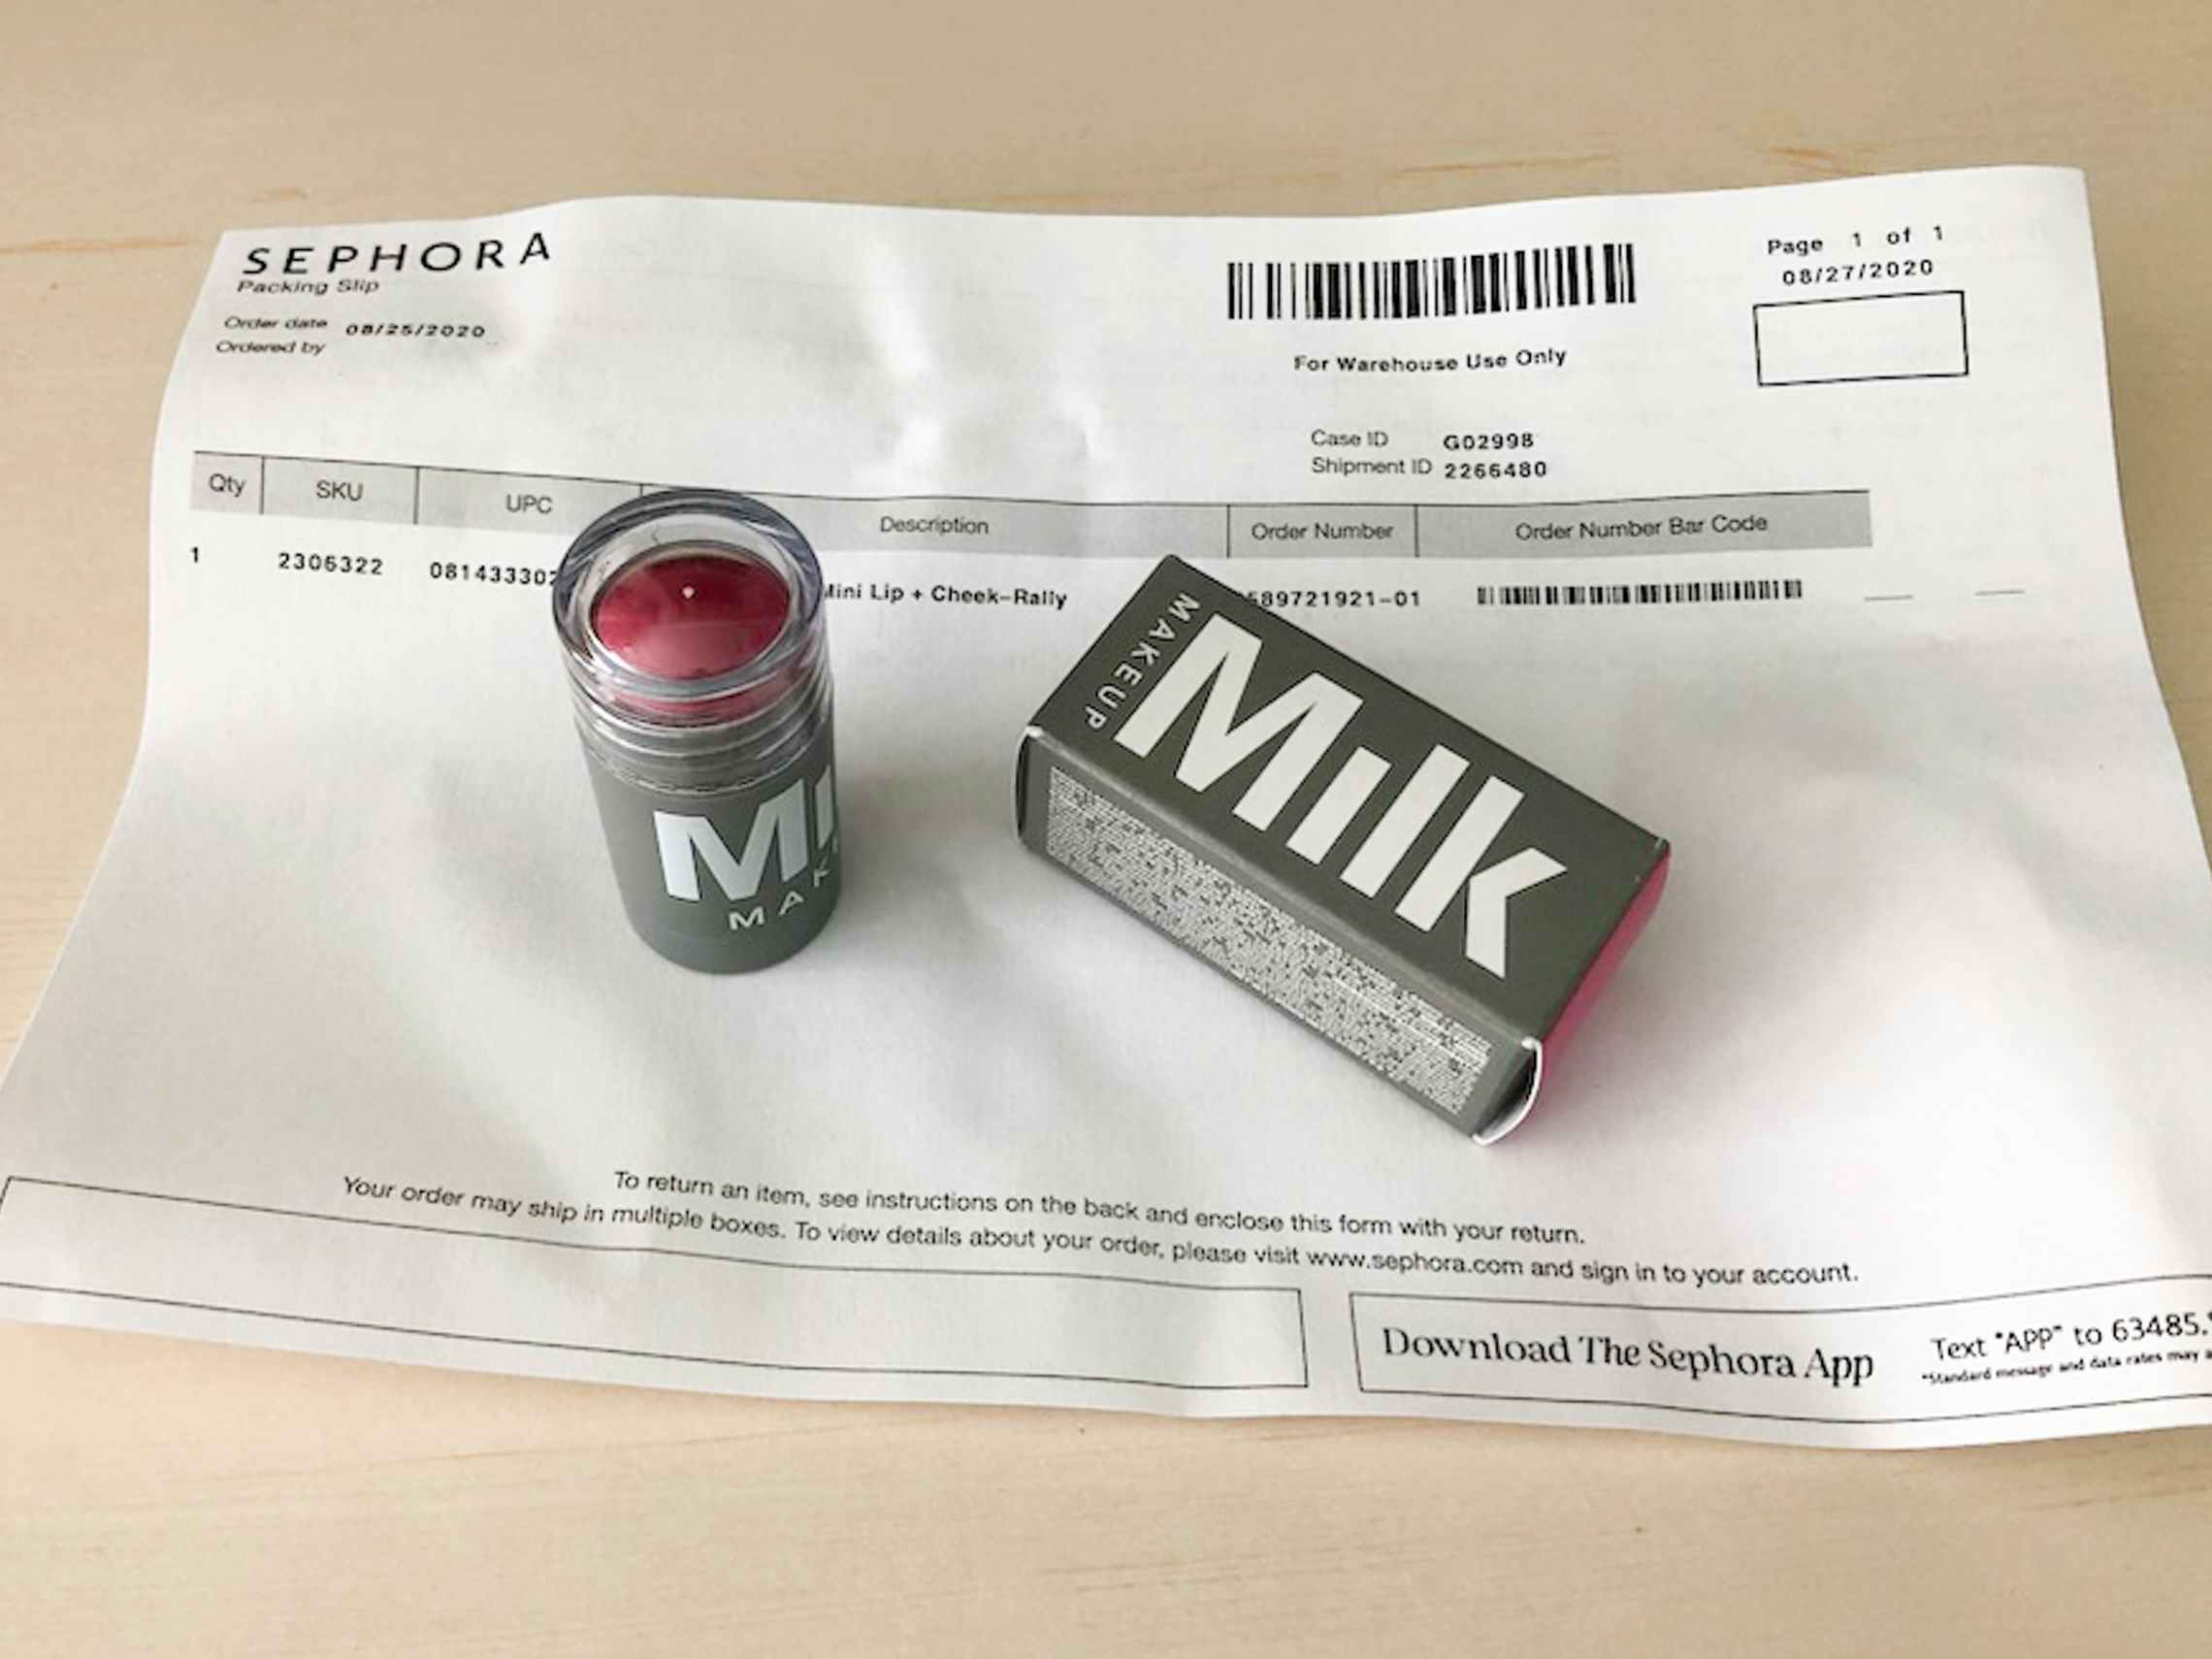 Online order receipt and Milk product from Sephora